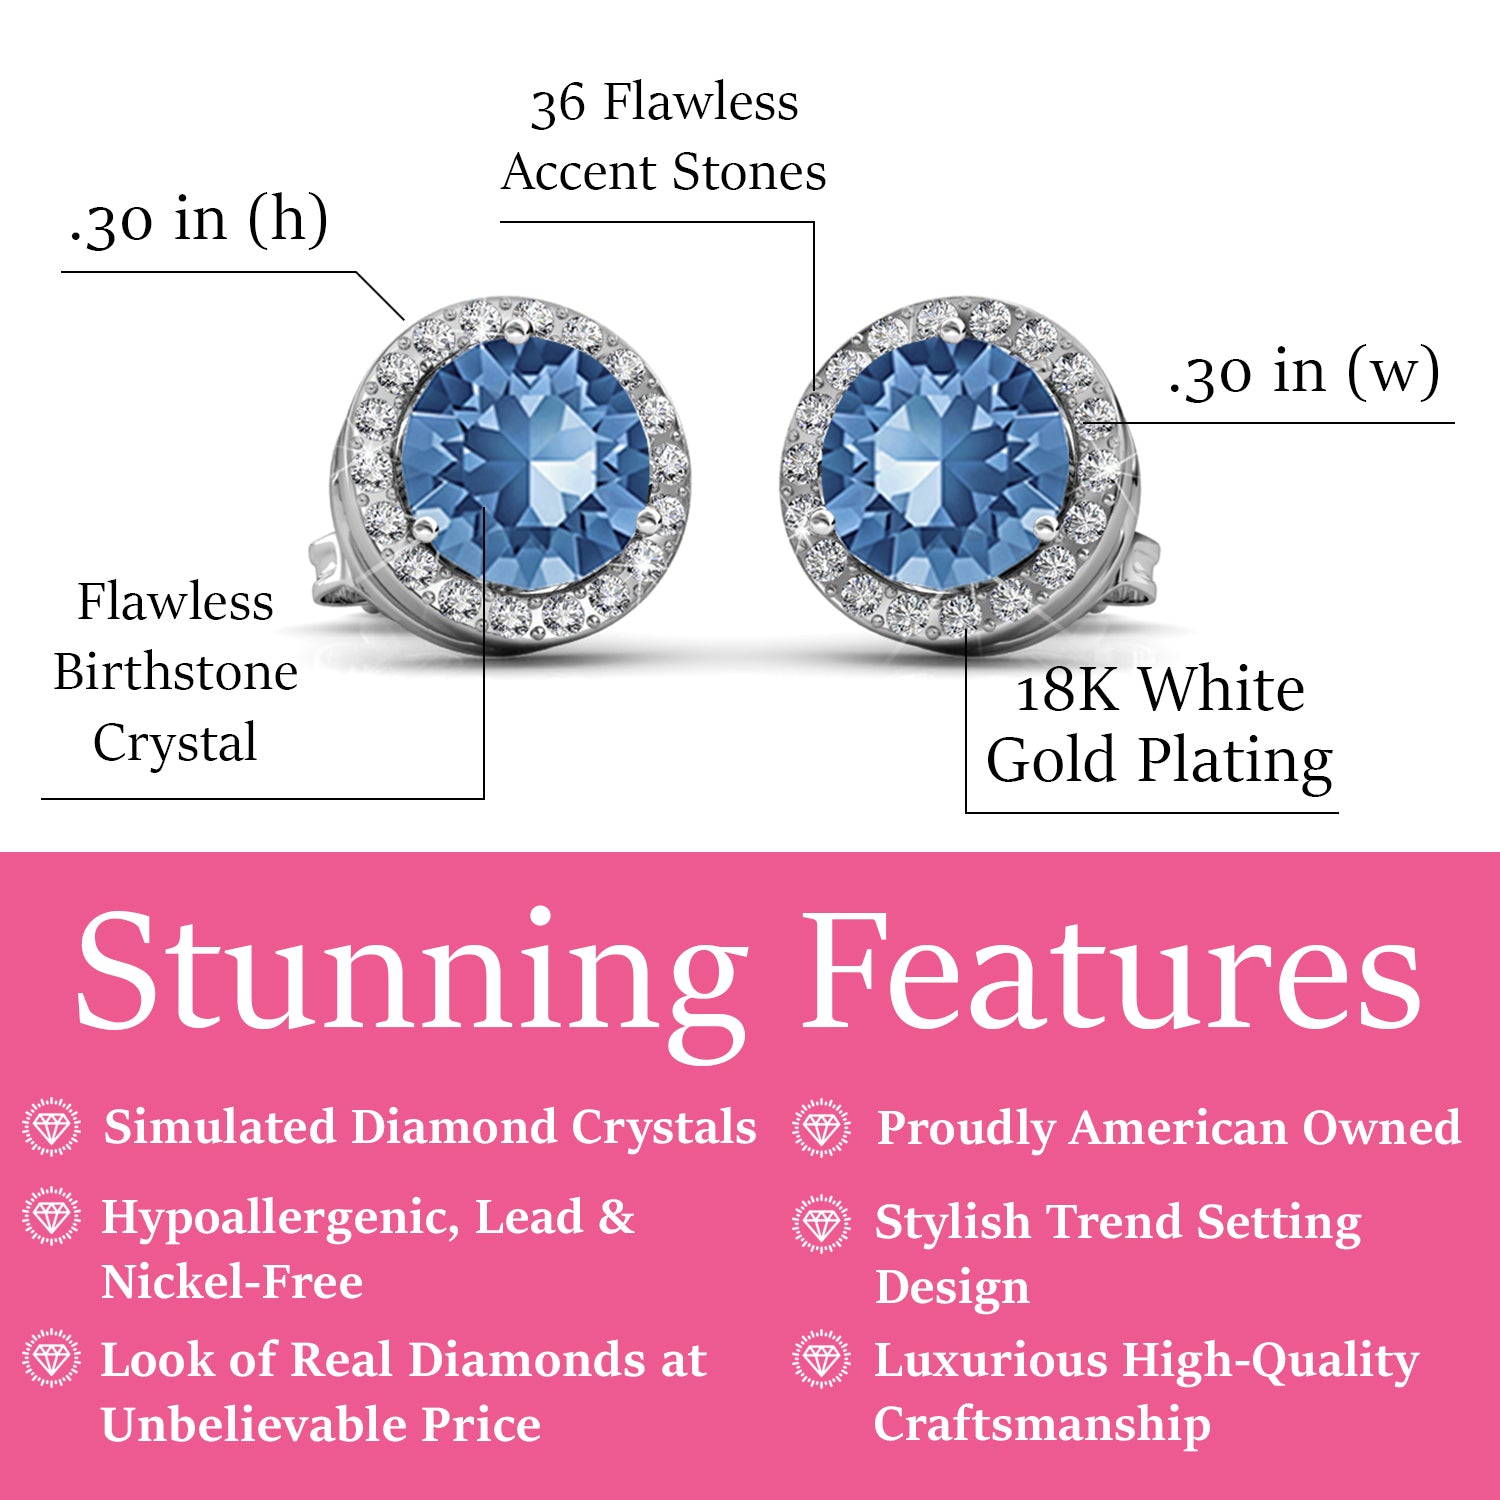 Royal December Birthstone Blue Topaz Earrings, 18k White Gold Plated Silver Halo Earrings with Round Cut Crystals